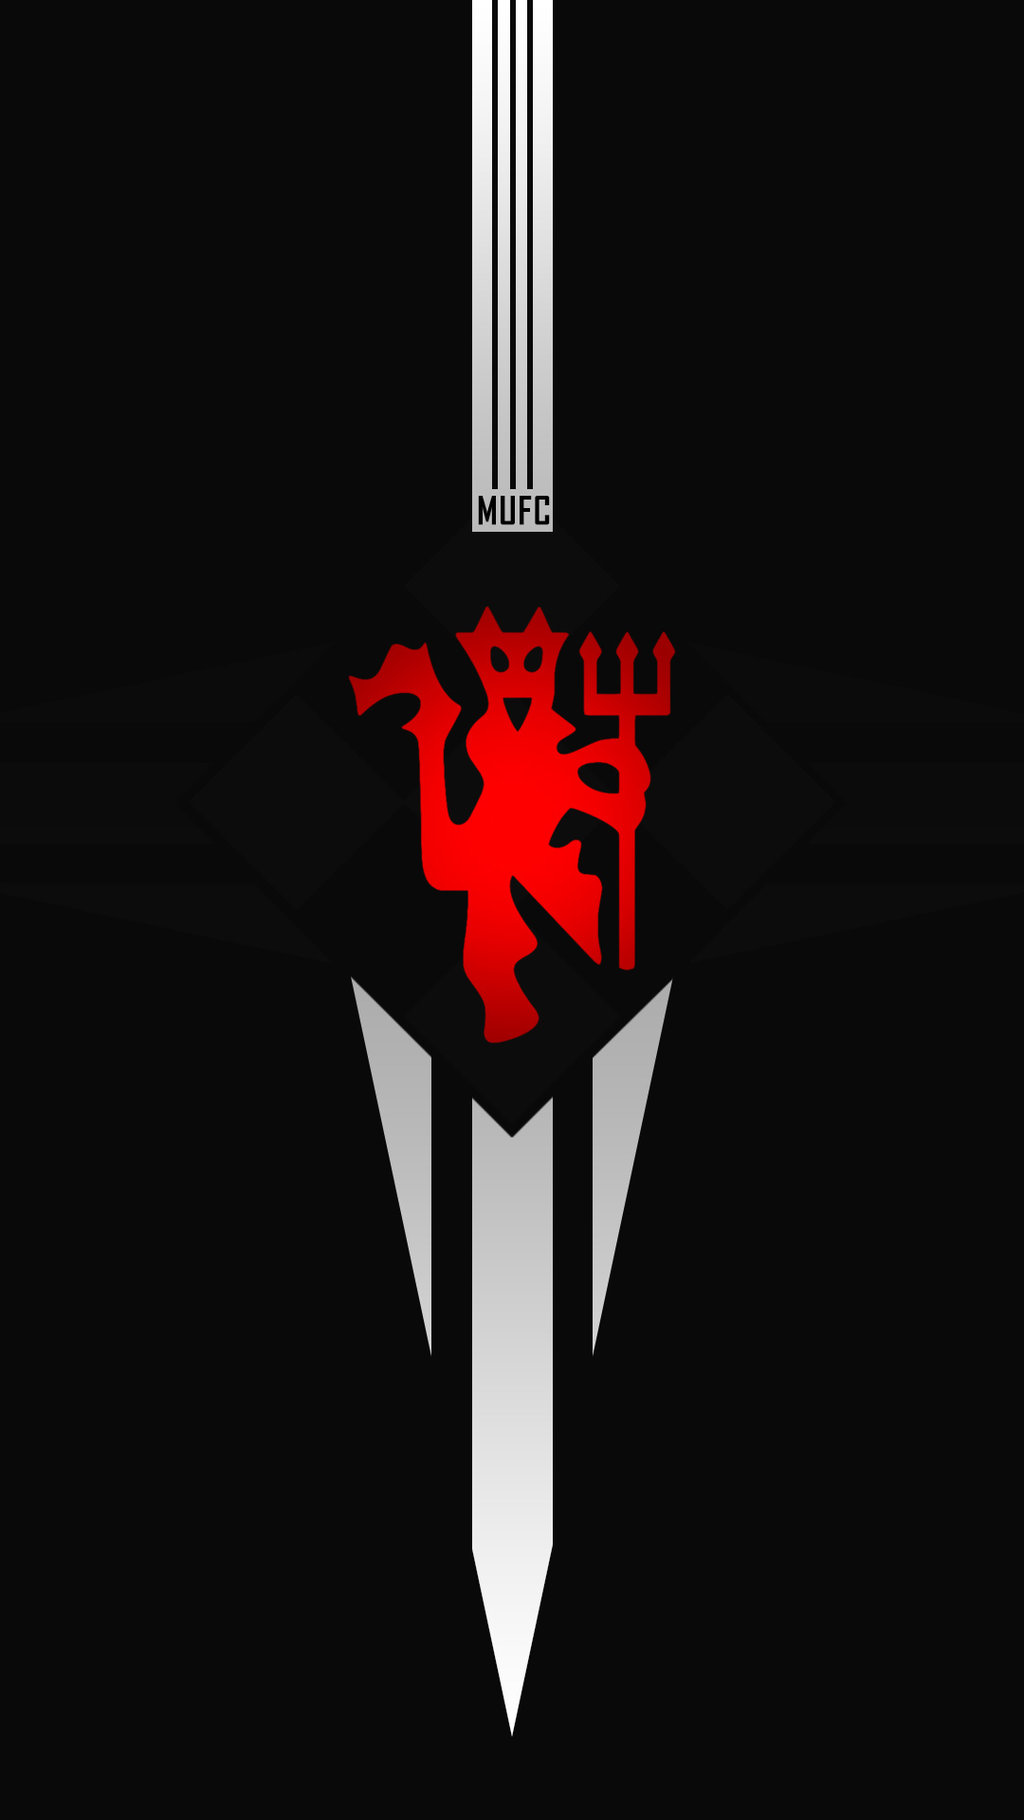 Man united hd logo wallpapers for iphone and android mobiles